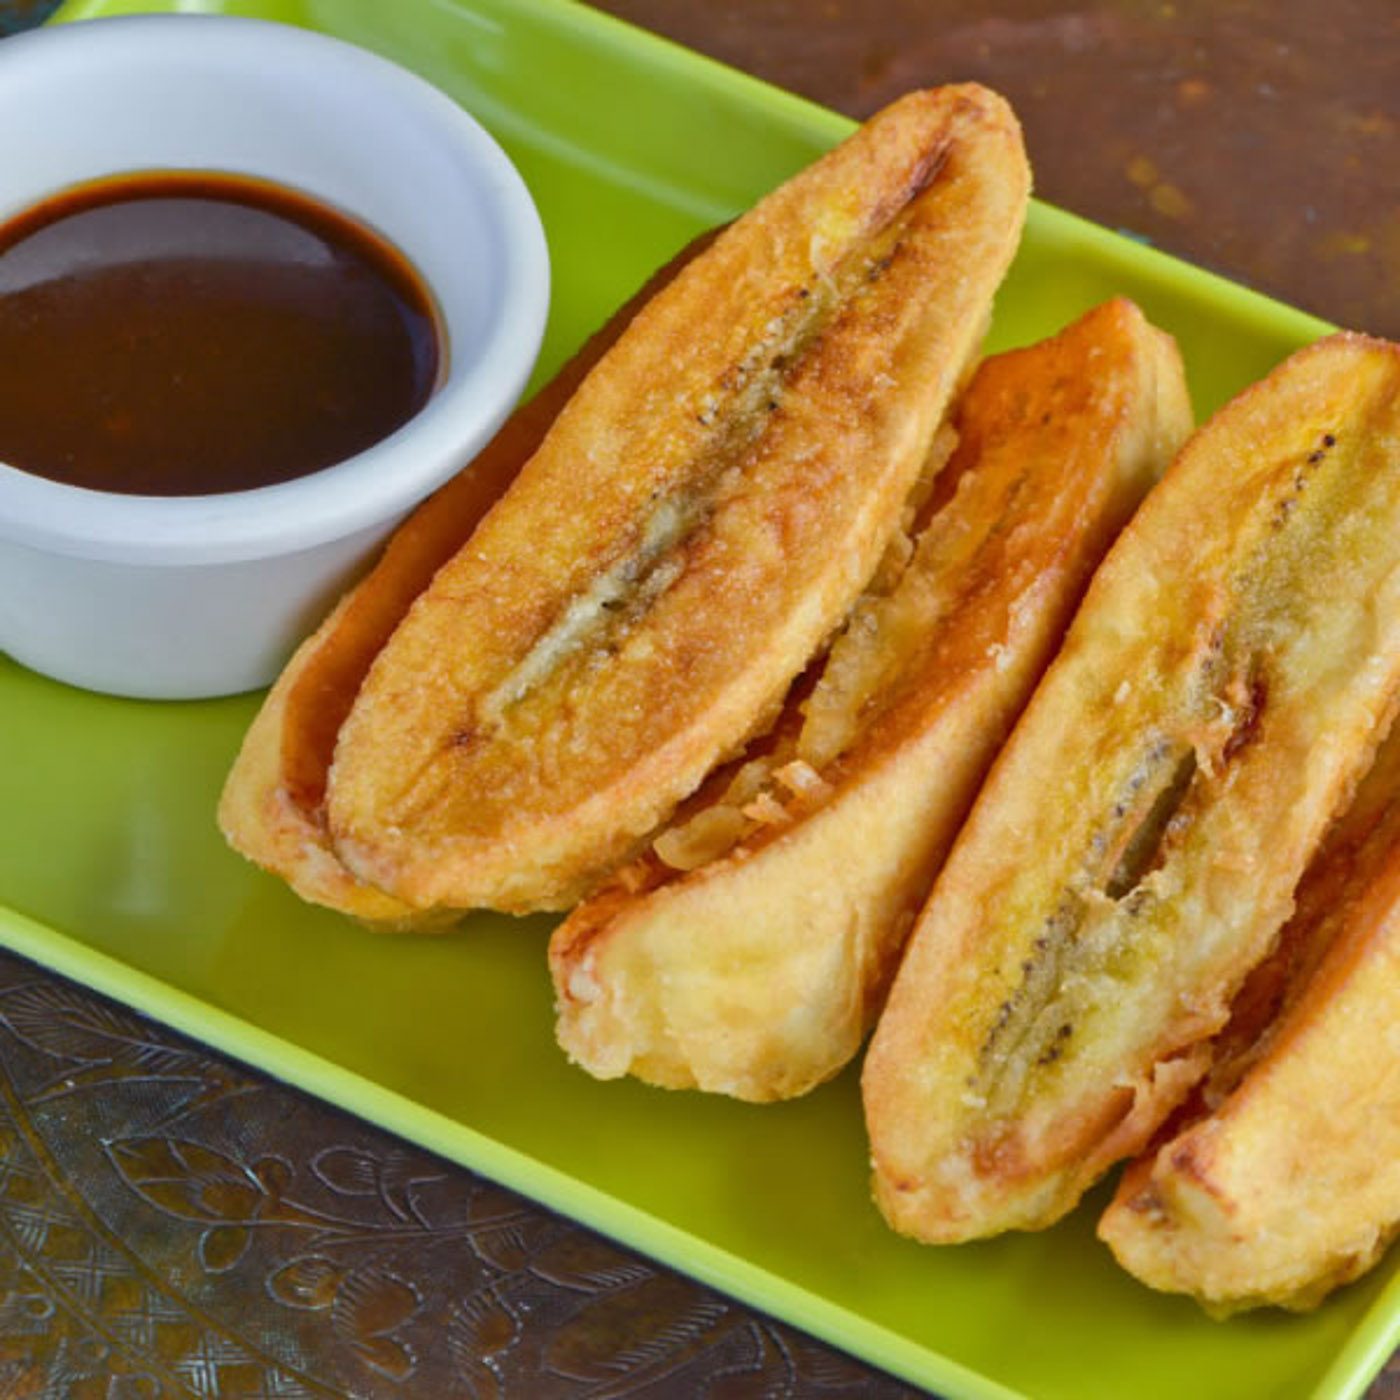 A LA CARTE. While bangbang is usually served as a set, Dennis Coffee Garden in Zamboanga City offers bangbang food for individual orders. Pictured is the jualan saging, or fried bananas, a bangbang staple. Photo courtesy of Dennis Coffee Garden 